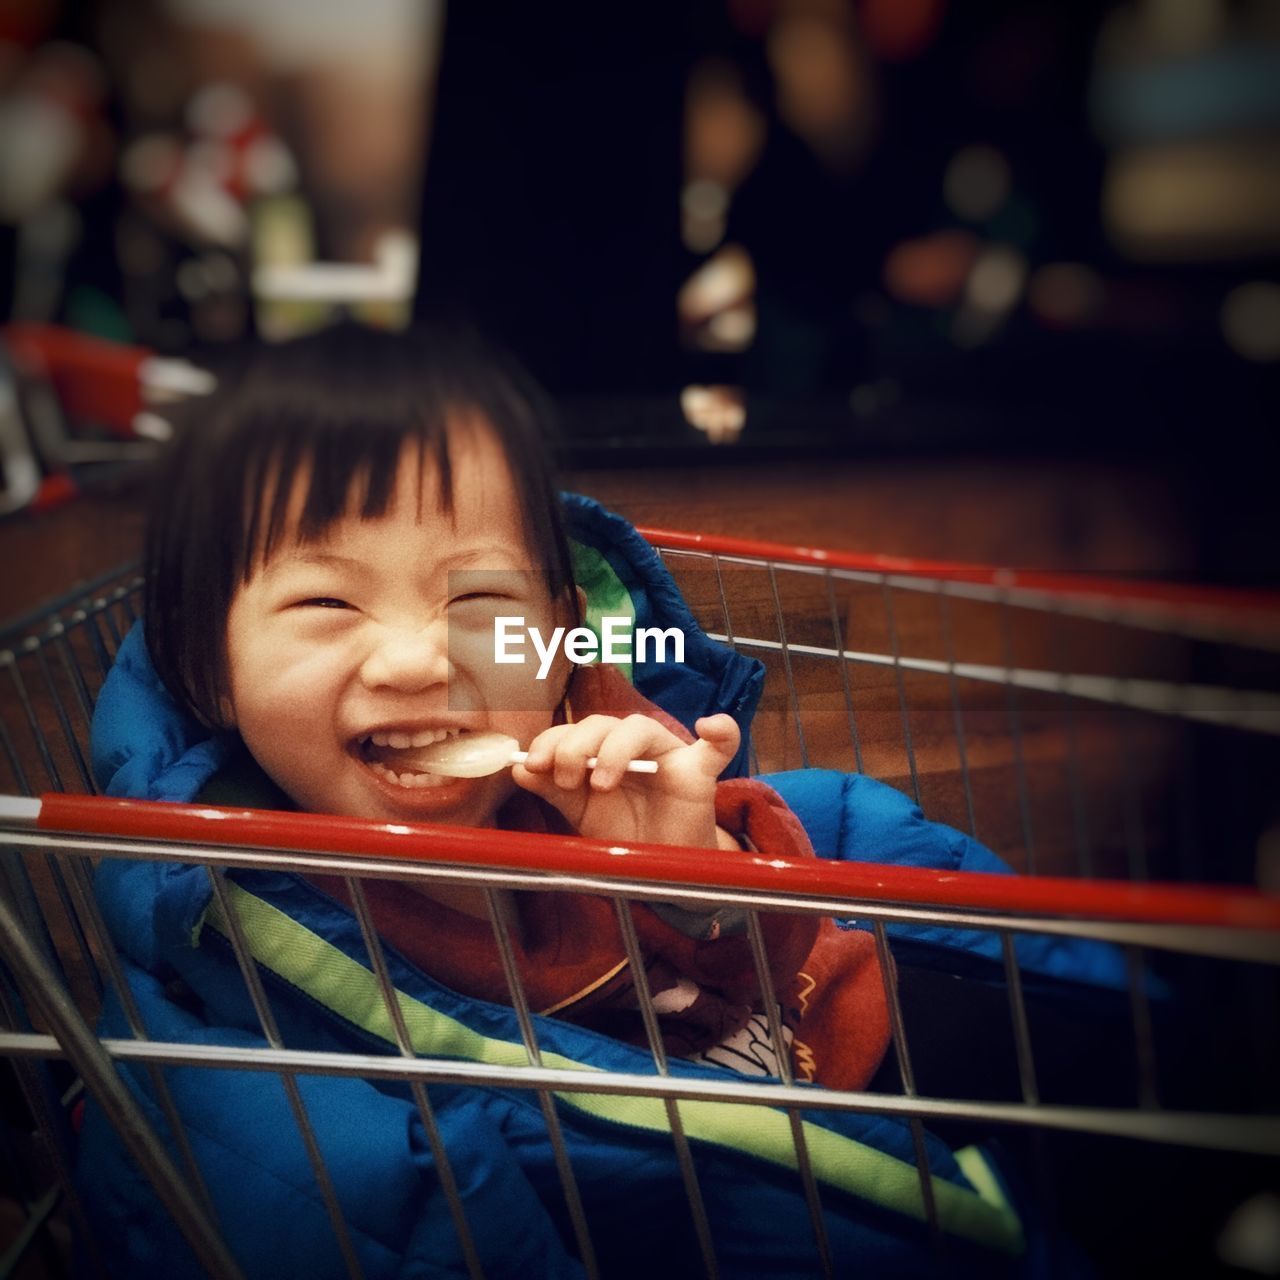 Cute girl eating lollipop while sitting in shopping cart